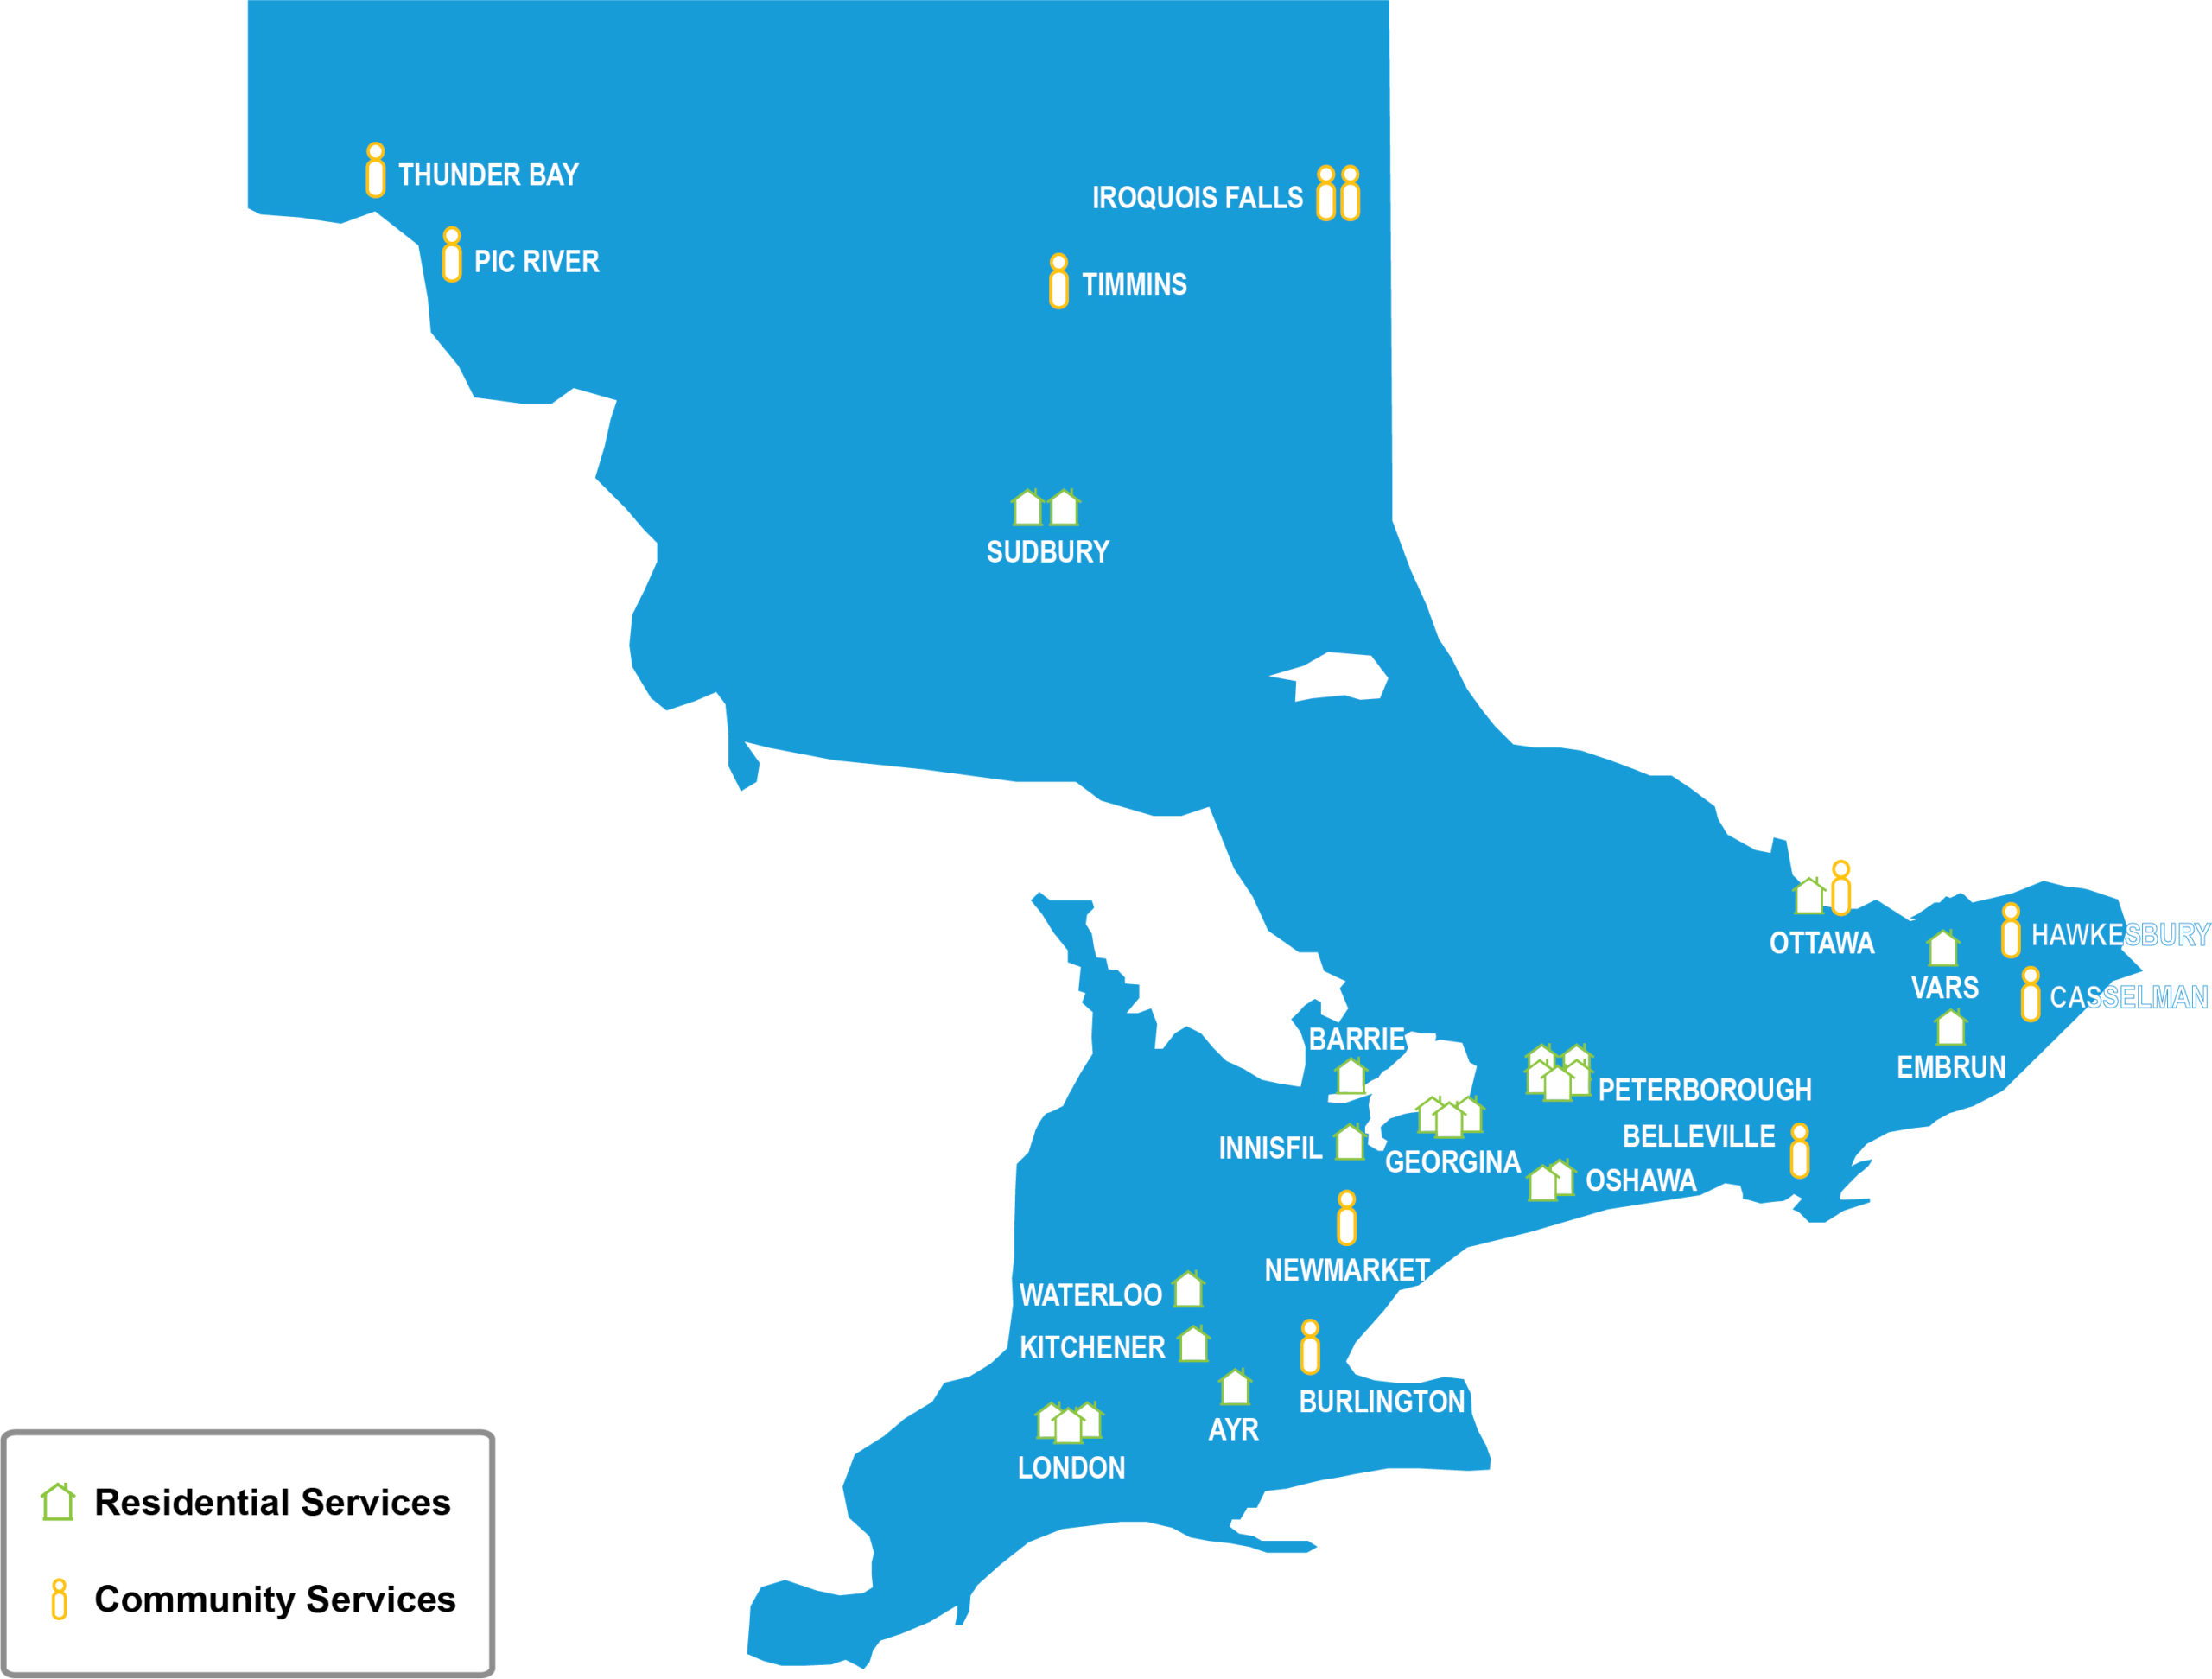 DeafBlind Ontario Services' Residential and Community Services programs across the province are represented on a blue map of Ontario.